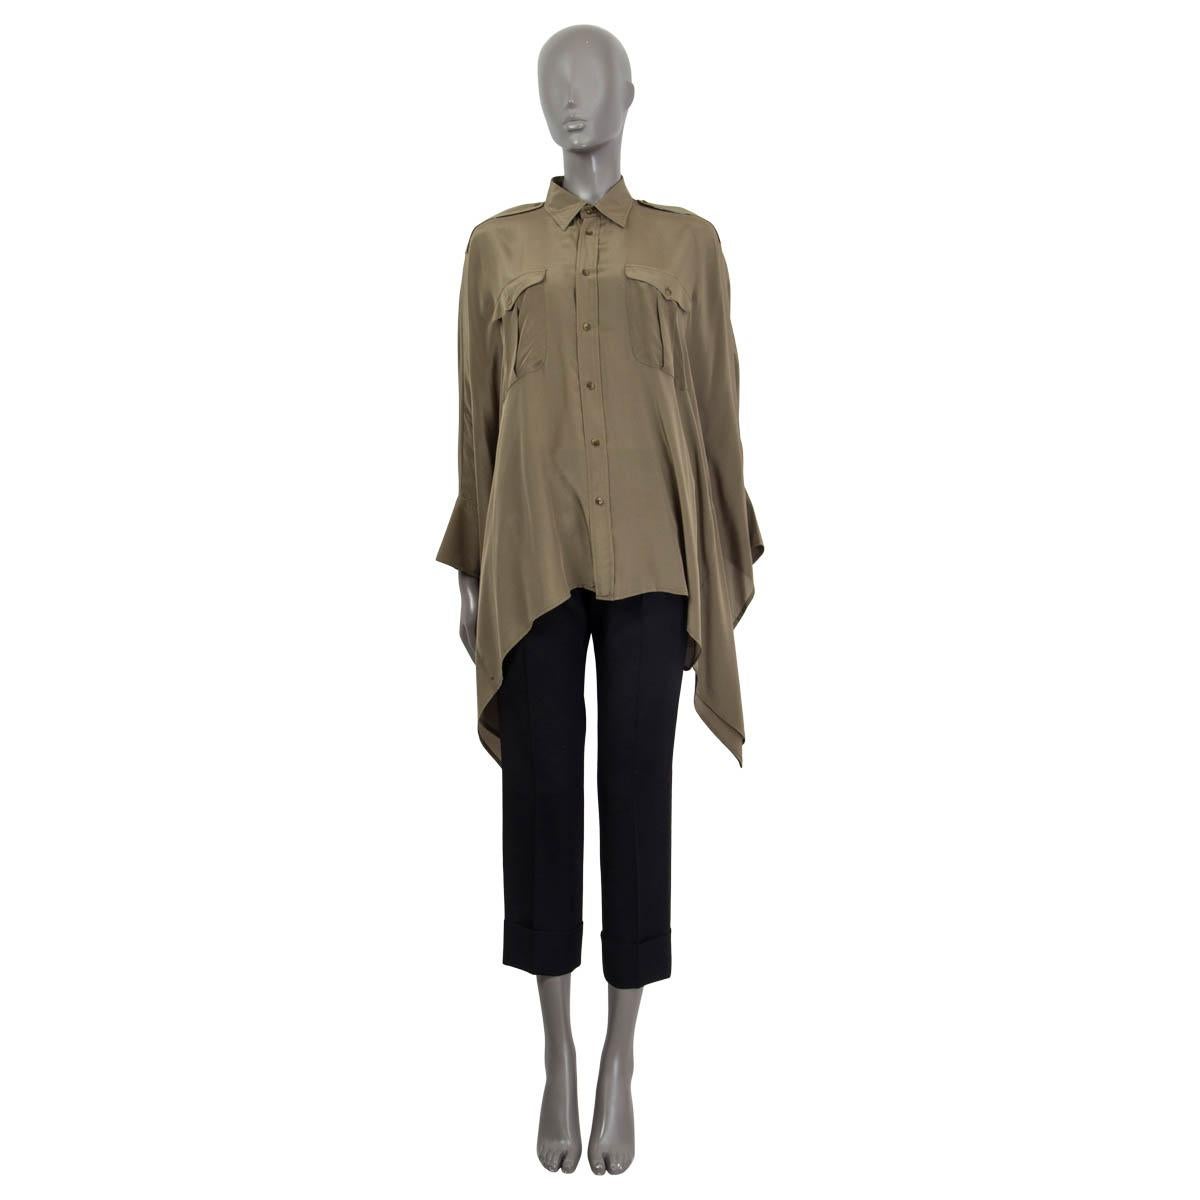 100% authentic Polo Ralph Lauren blouse in olive green silk (100%). Features epaulettes at the shoulder, 3/4 raglan sleeves (sleeve measurements taken from the neck) and two buttoned patch pockets on the front. Opens with seven buttons on the front.